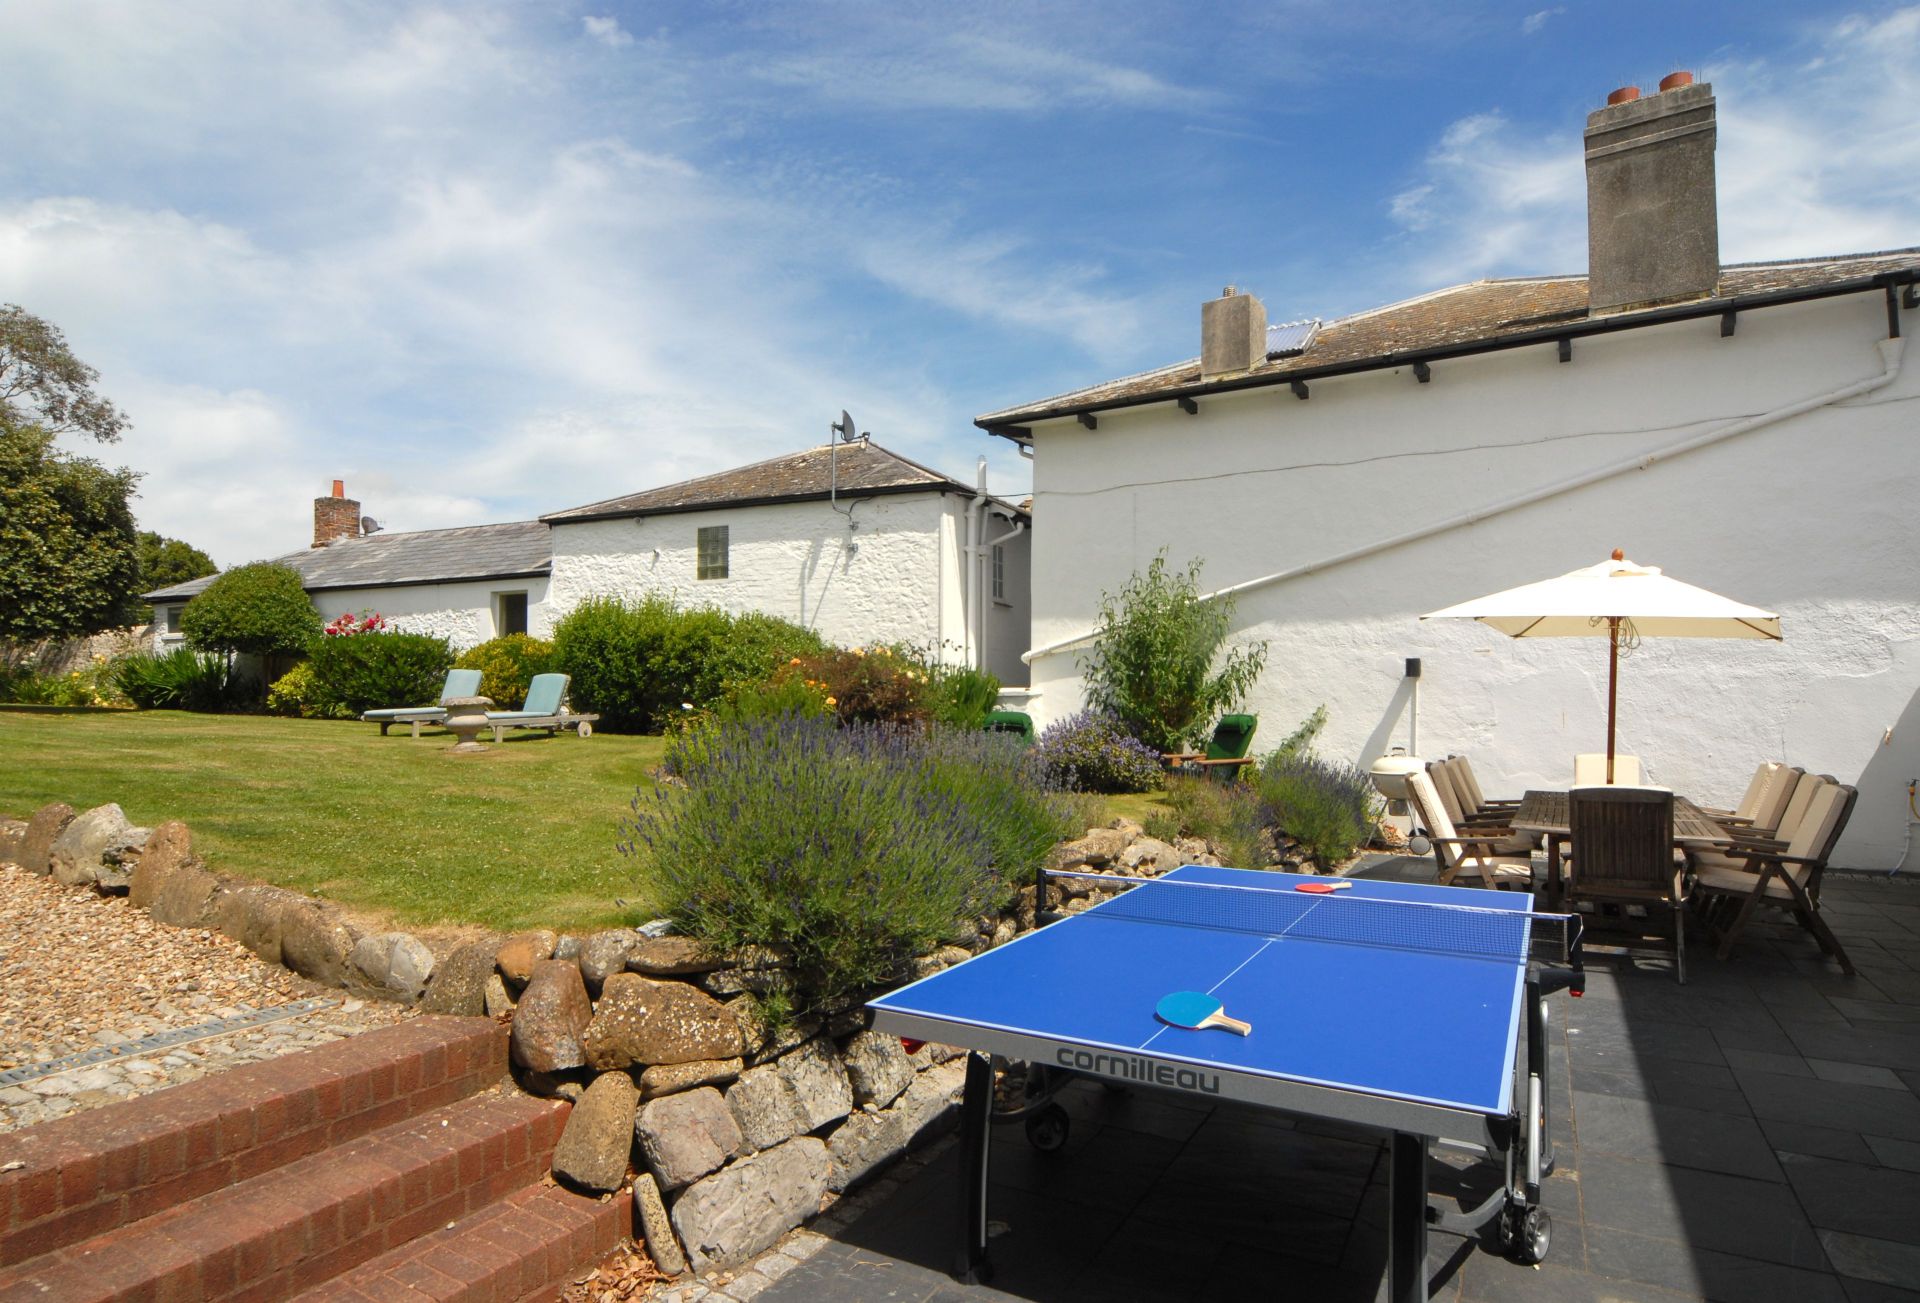 Albury House is located in Lyme Regis and surrounding villages